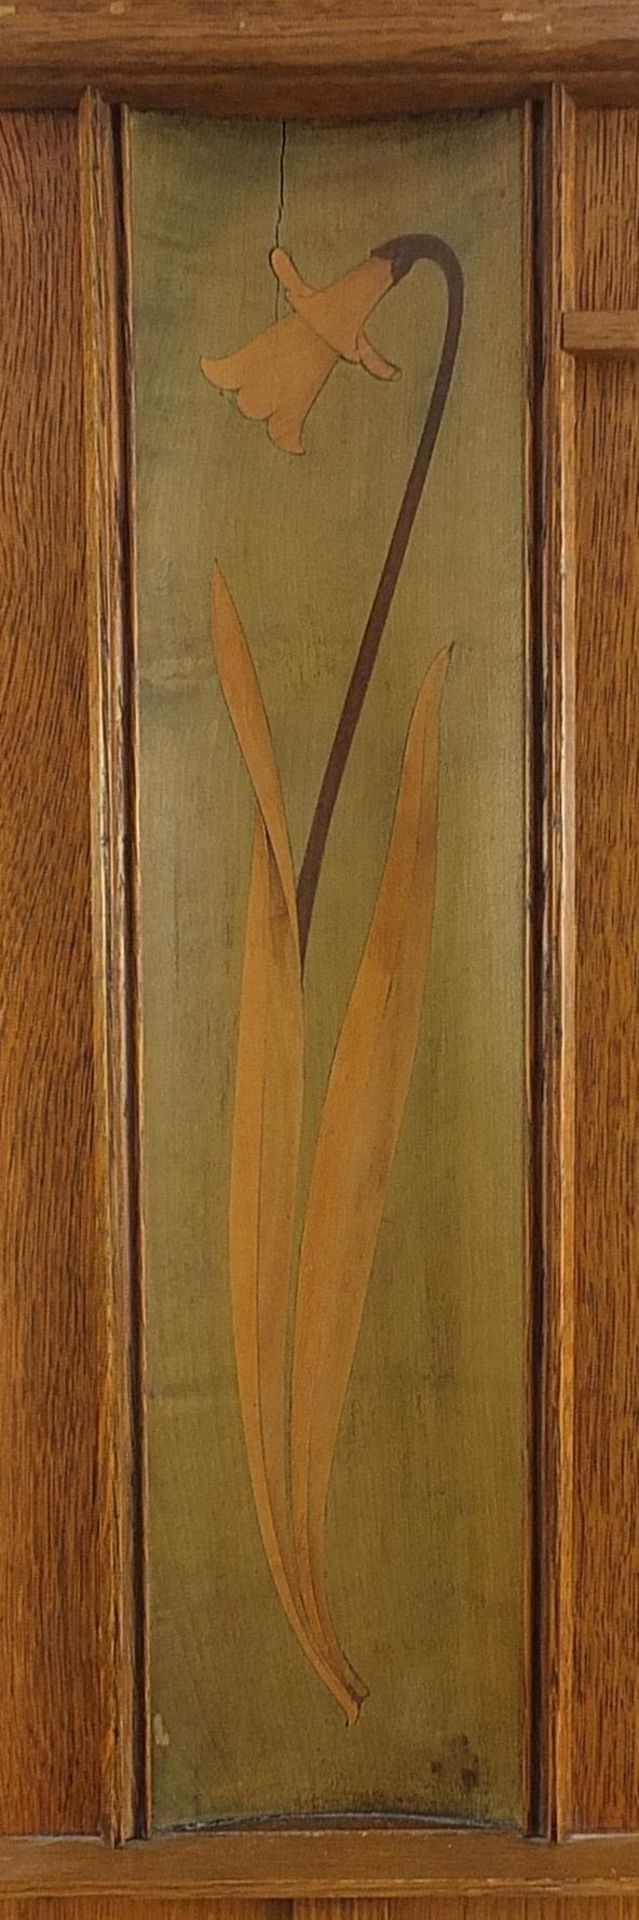 Manner of Baillie Scott, Liberty & Co Arts & Crafts oak wardrobe with mirrored door inlaid with daf - Image 3 of 5